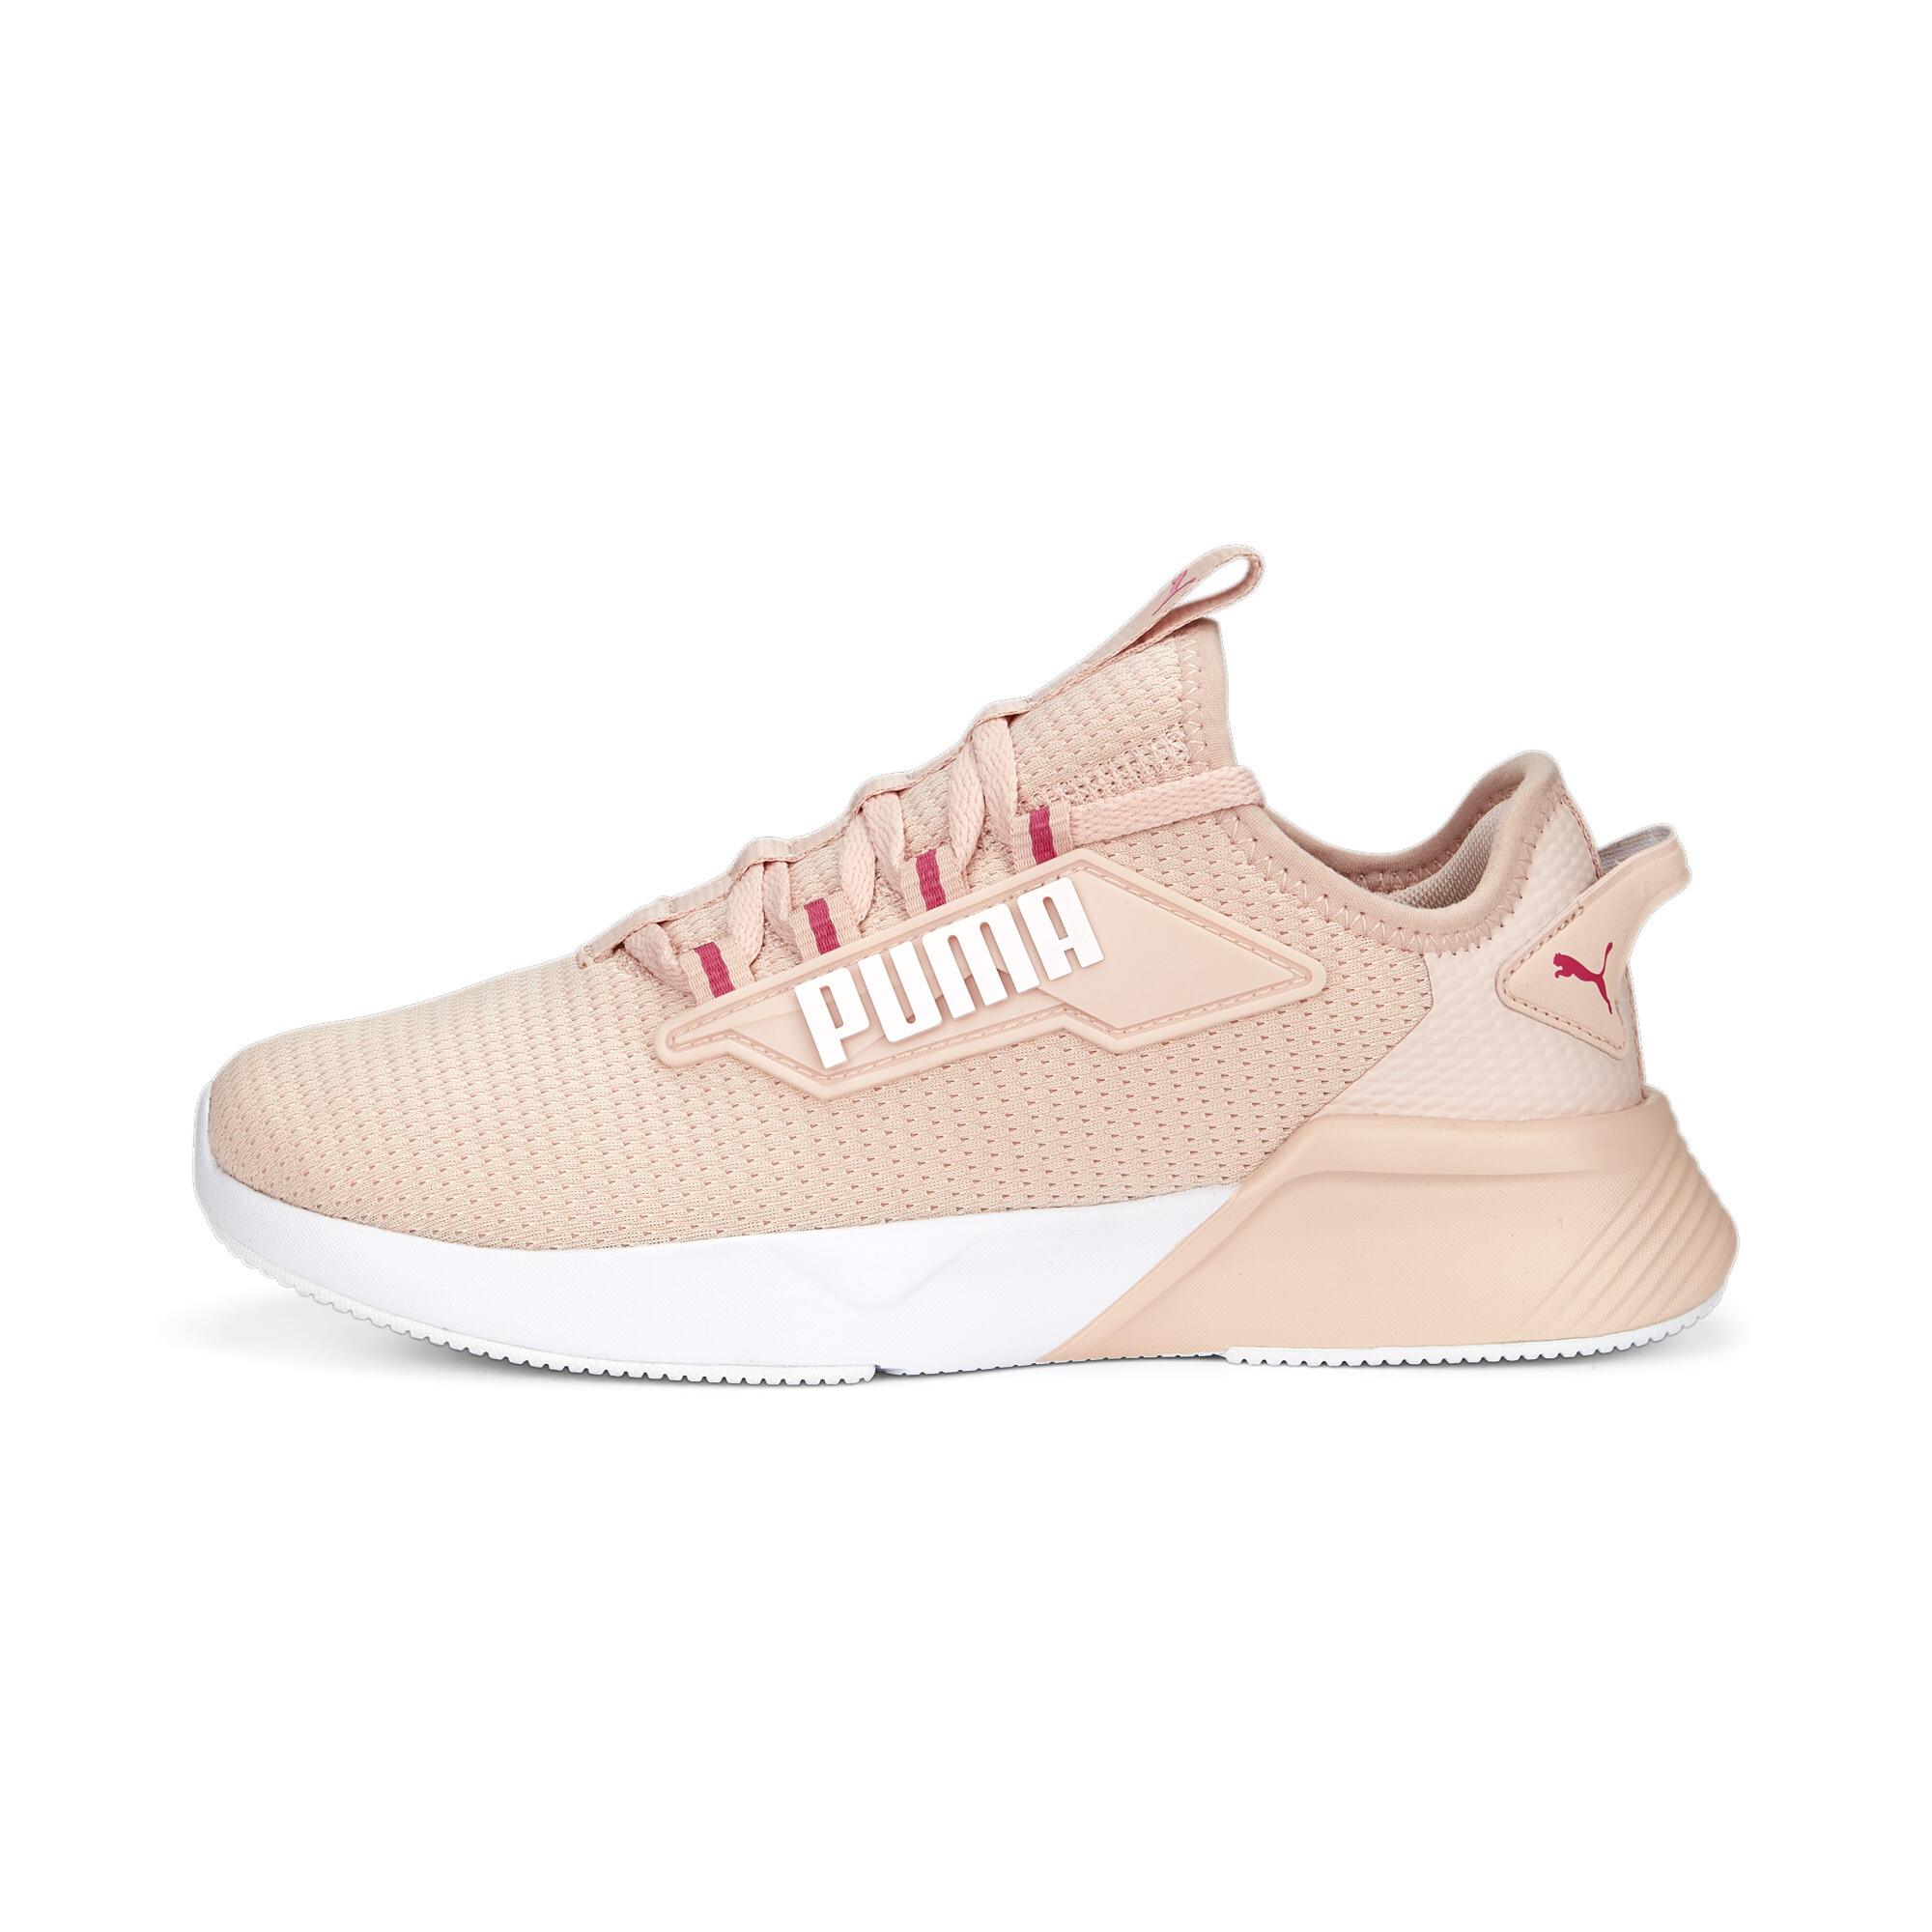 Puma Retaliate 2 Sneakers Youth, Pink, Size 38, Shoes